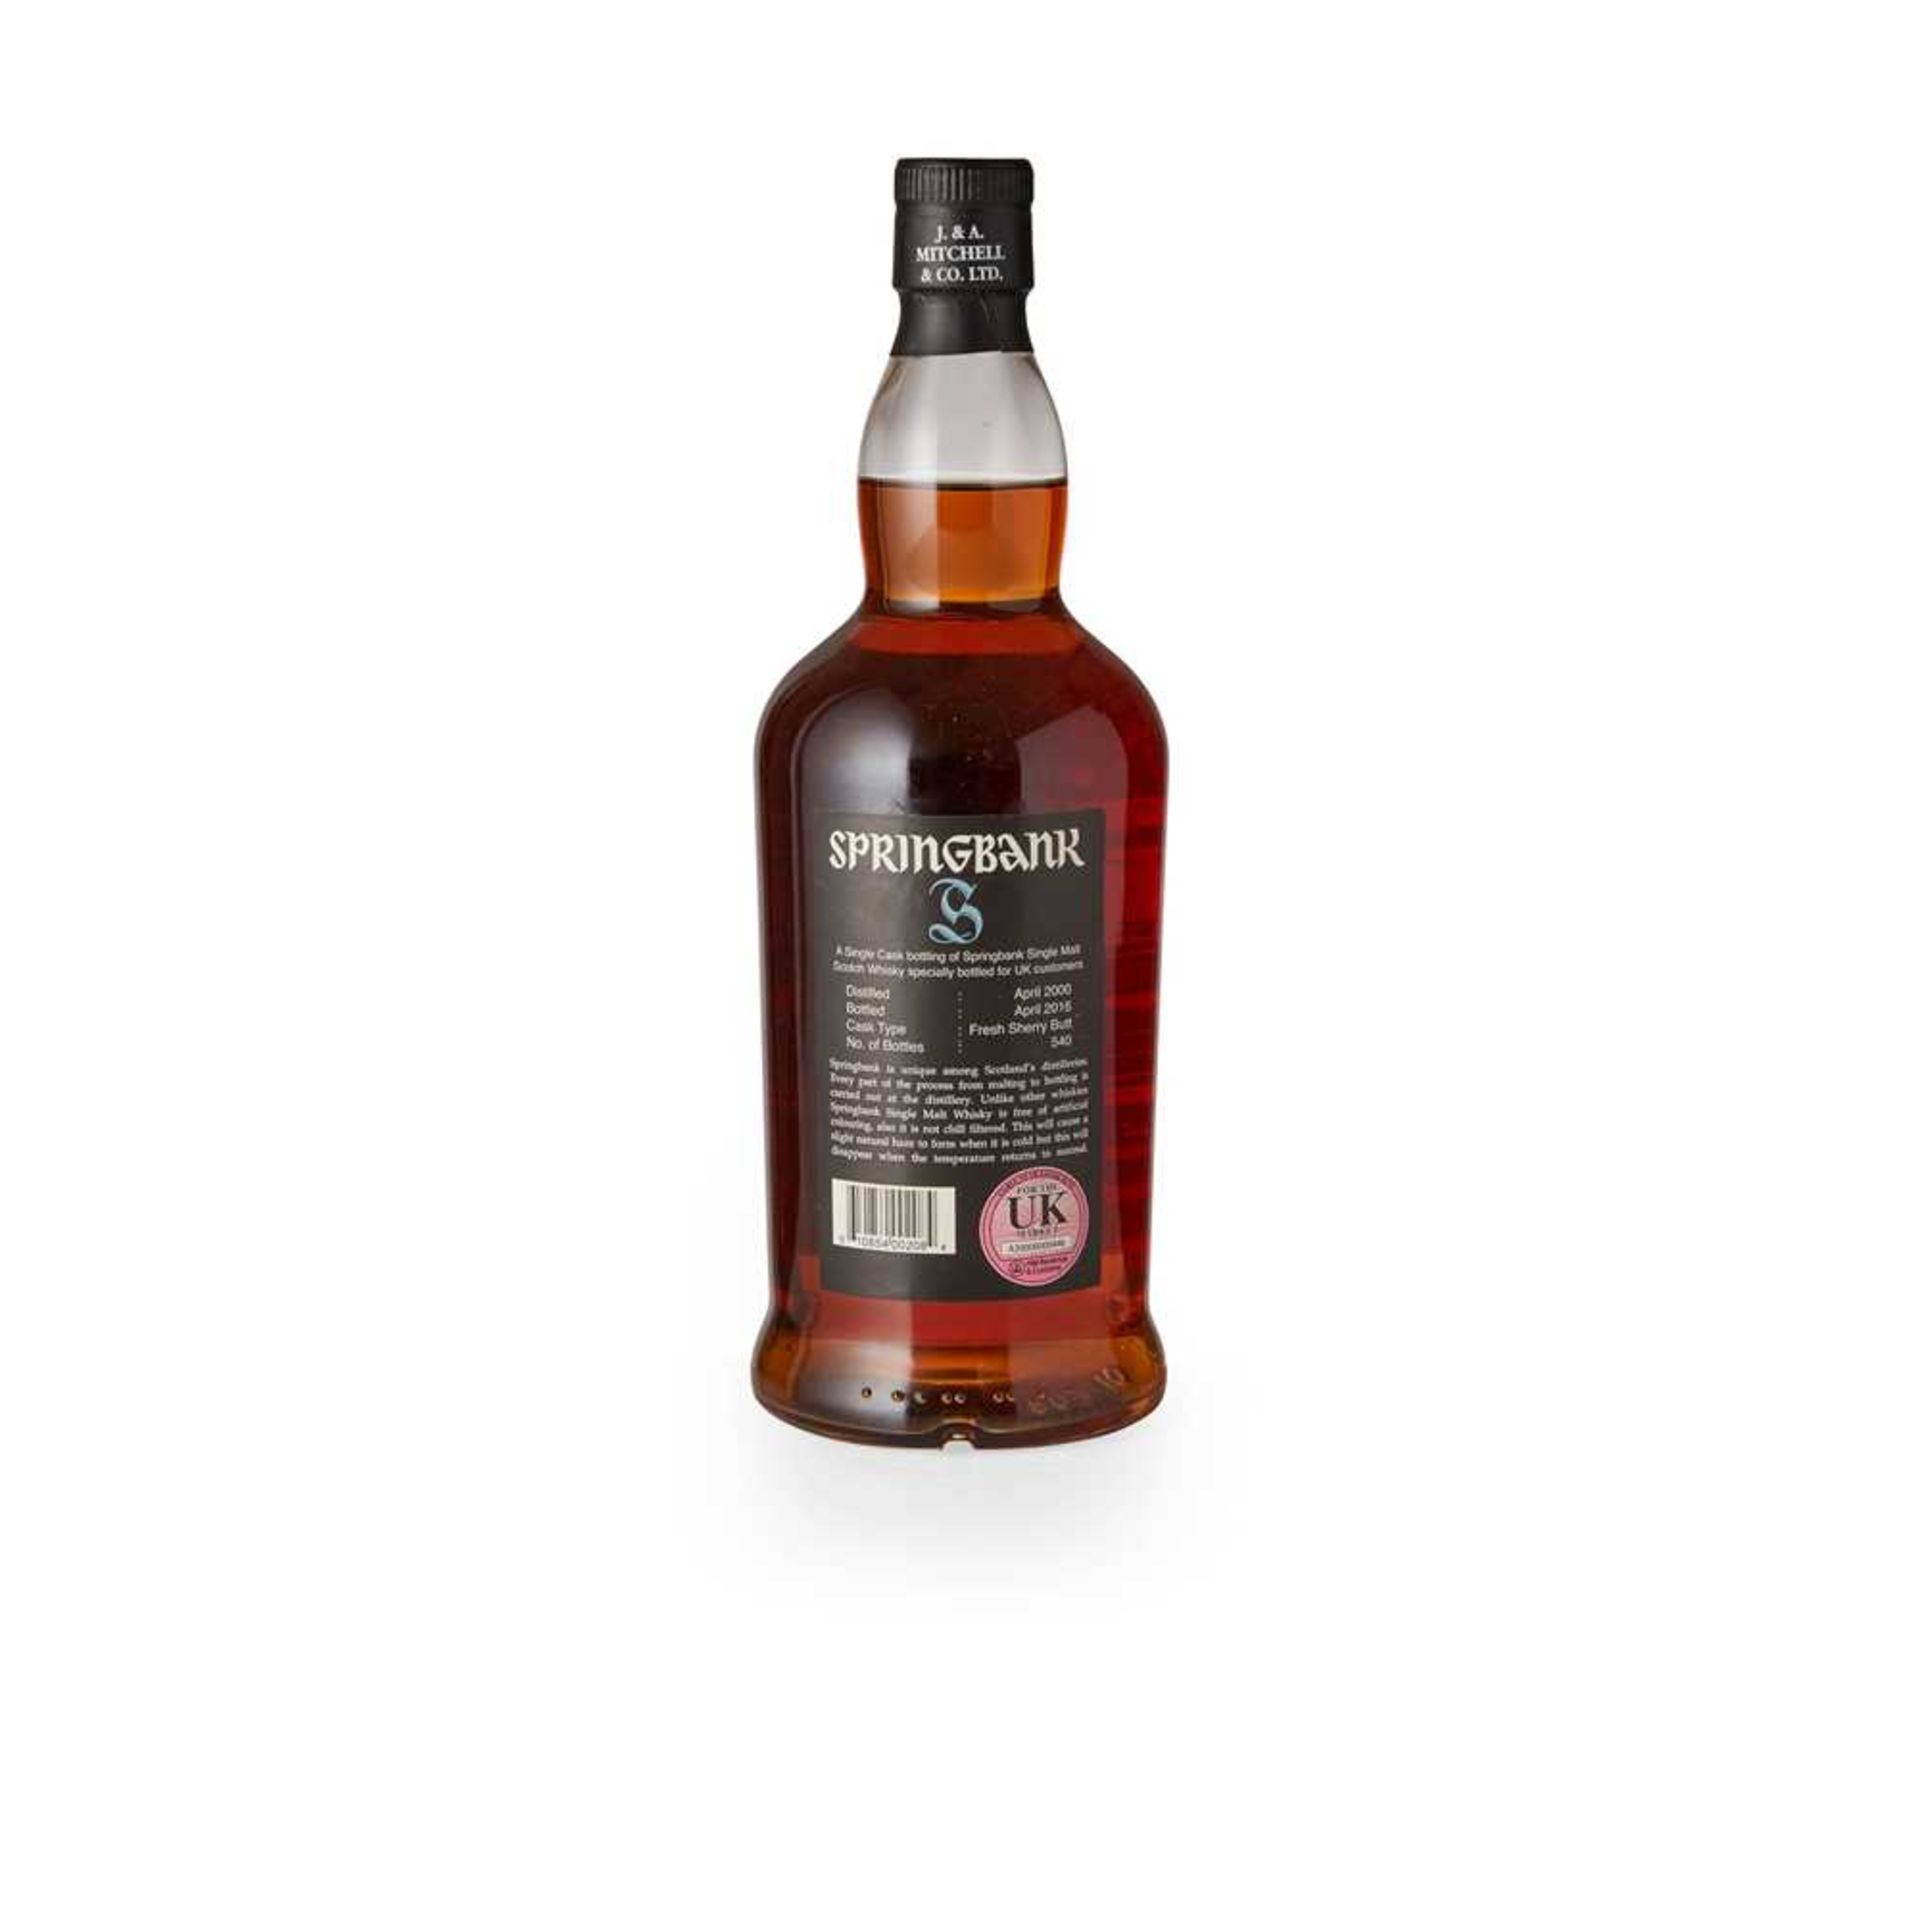 SPRINGBANK 2000 16 YEAR OLD - Image 3 of 3